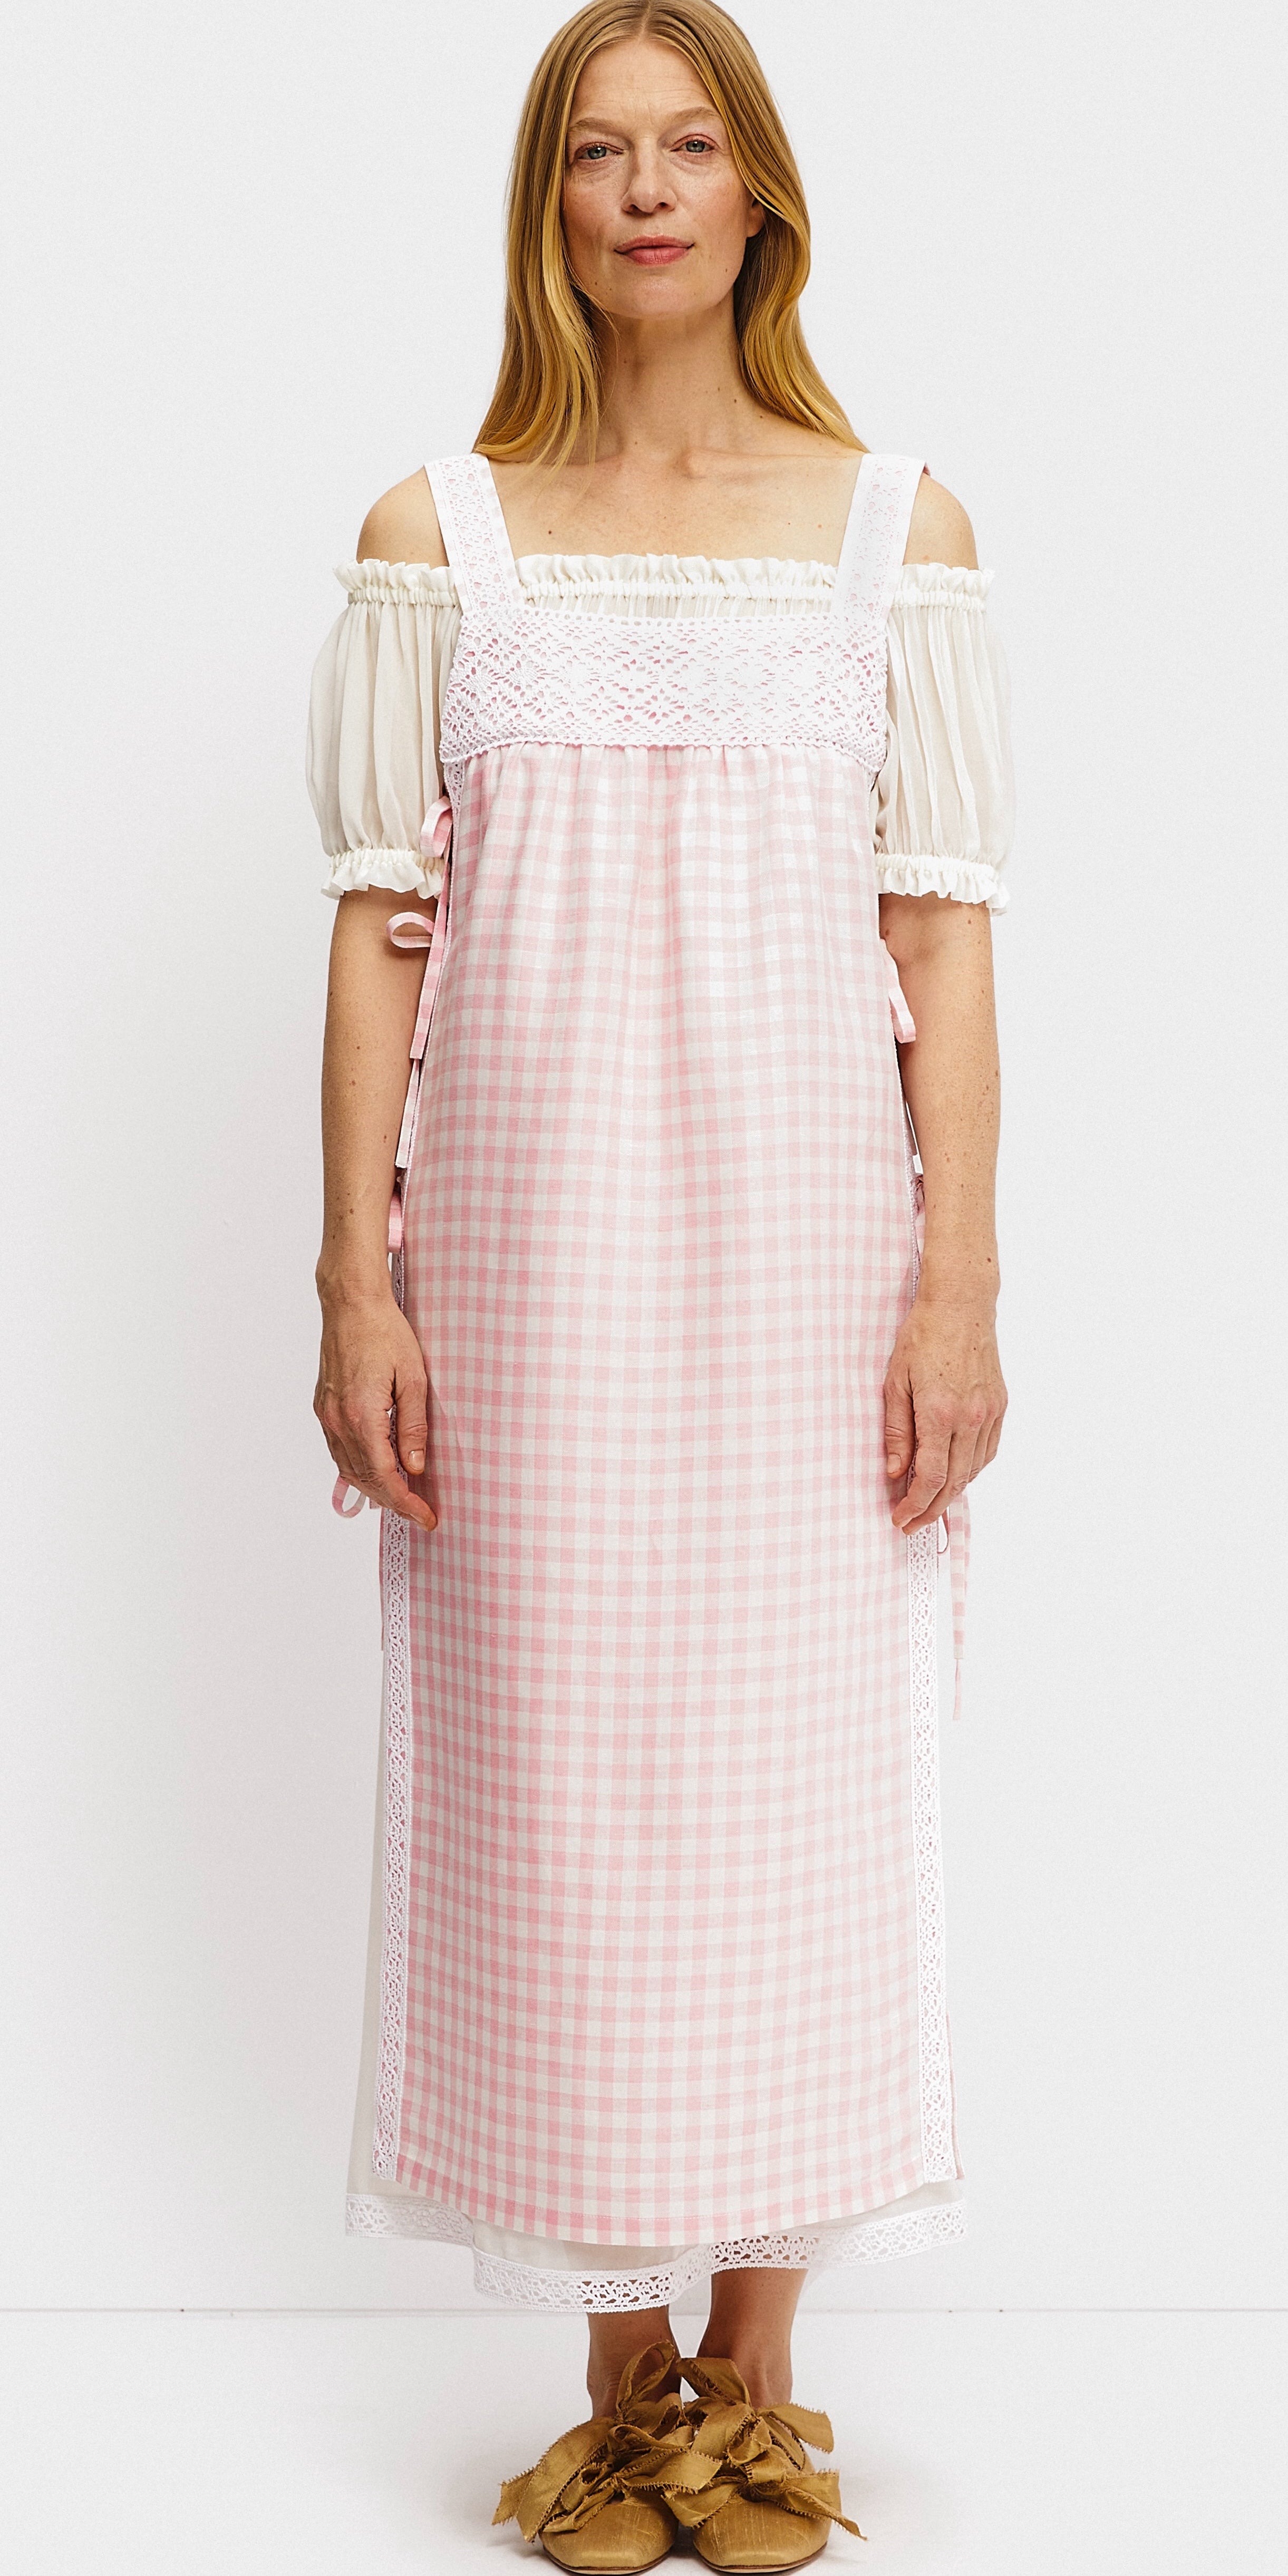 pink-and-white-gingham-dress-over-a-white-slip